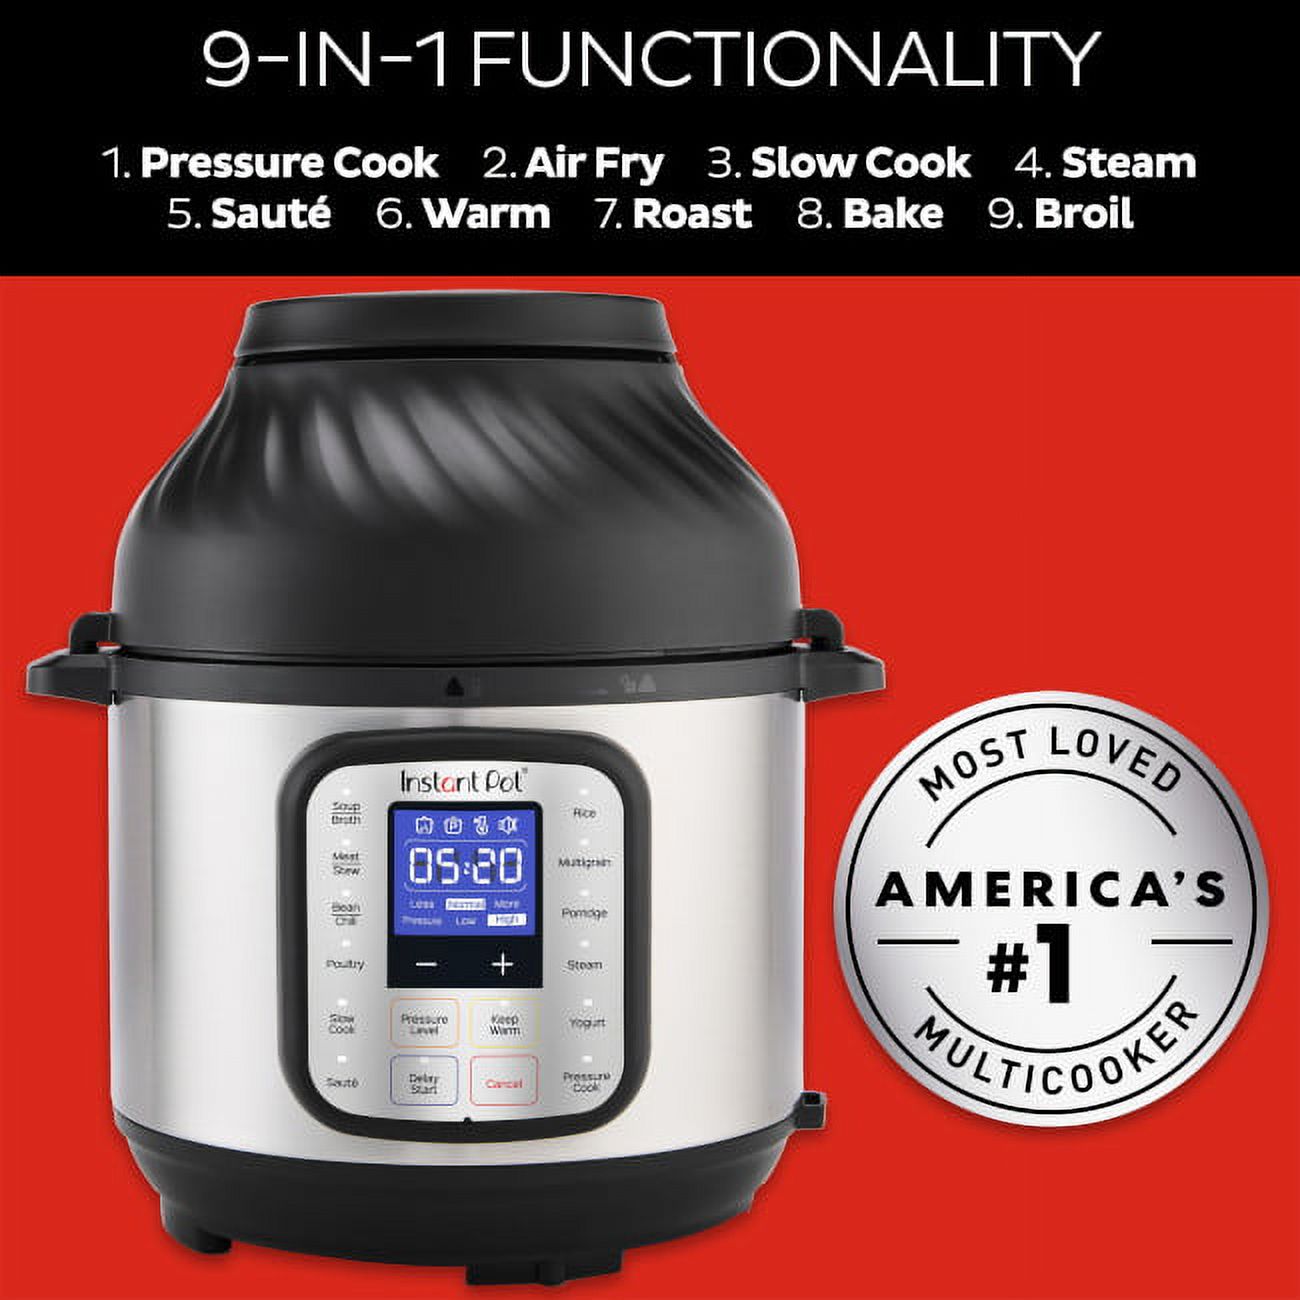 Instant Pot 6 Qt Duo Crisp 9-in-1 Air Fryer and Pressure Cooker Combo - image 4 of 9